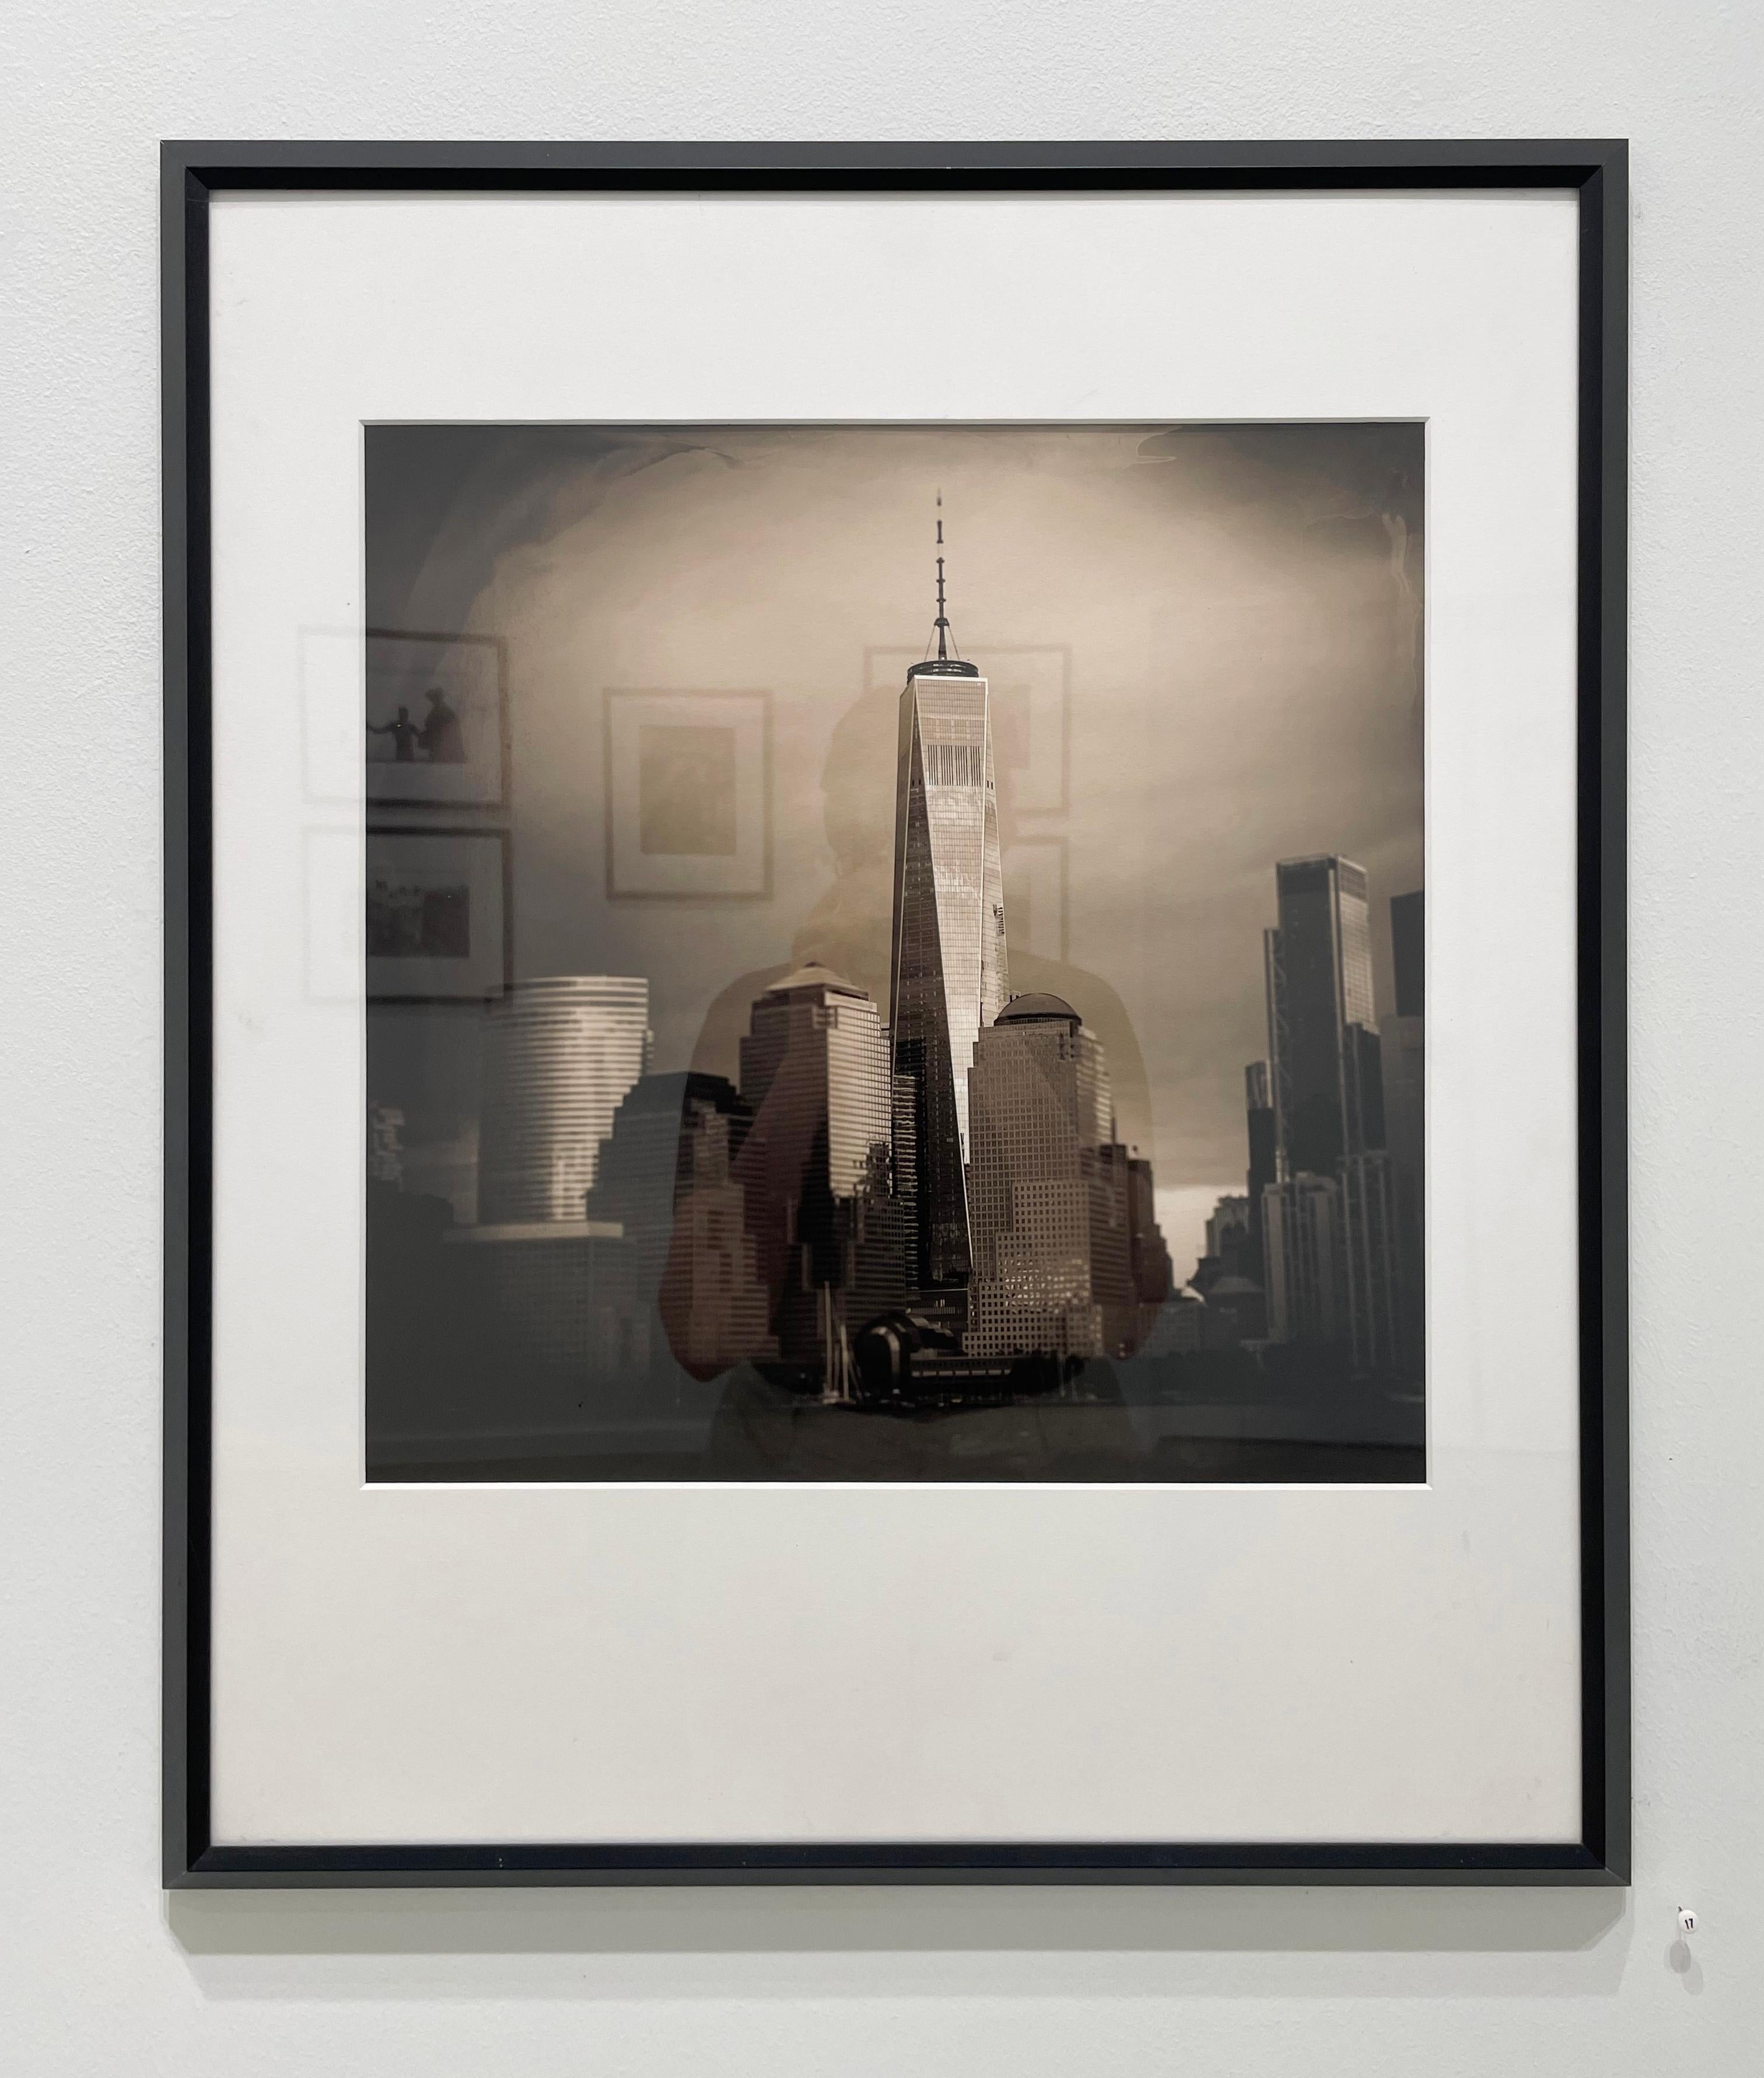 Skyline by Keith Carter is a sepia toned archival pigment print, featuring a section of buildings and skyscrapers in New York City. 

Image size: 16 x 16 in.
Paper size: 22 x 17 in.
Edition 2/25
Signed, titled, dated and numbered in black ink on